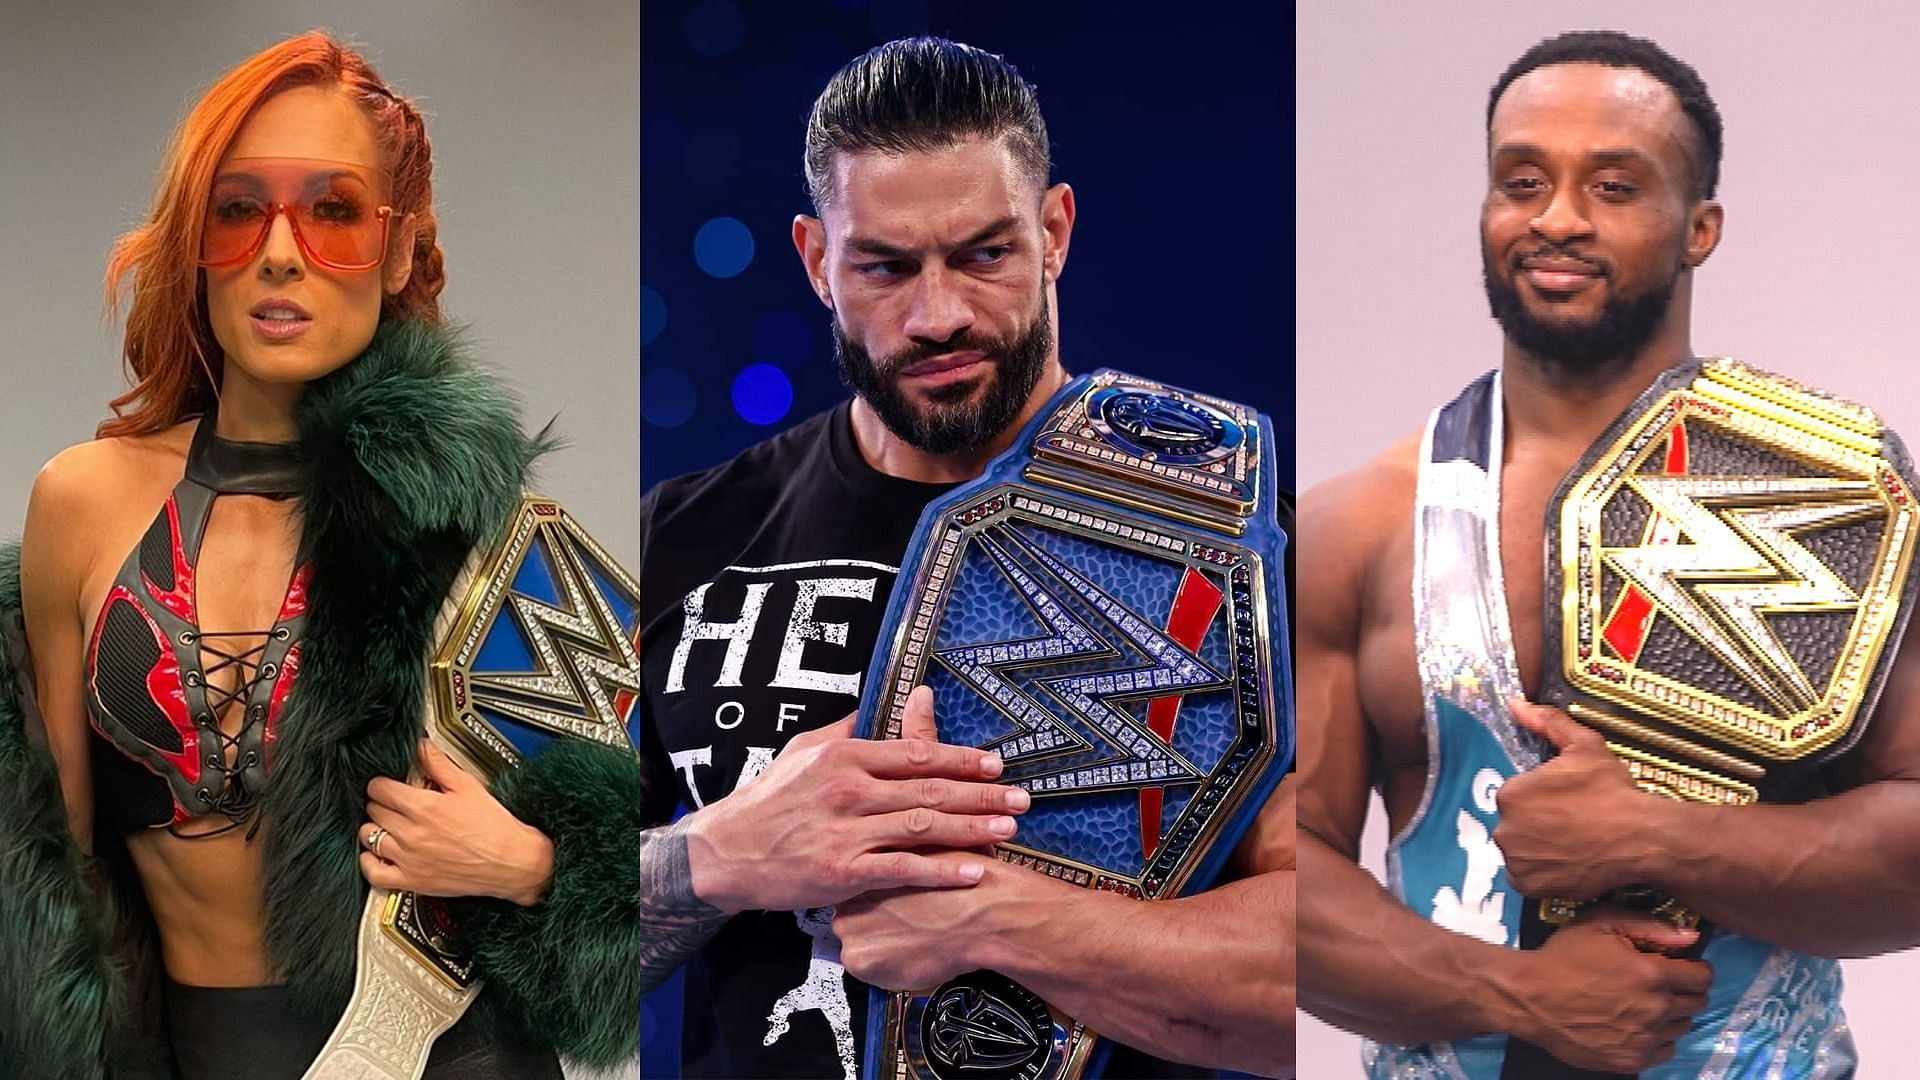 WWE Crown Jewel 2021 is will see many champions put their titles on the line